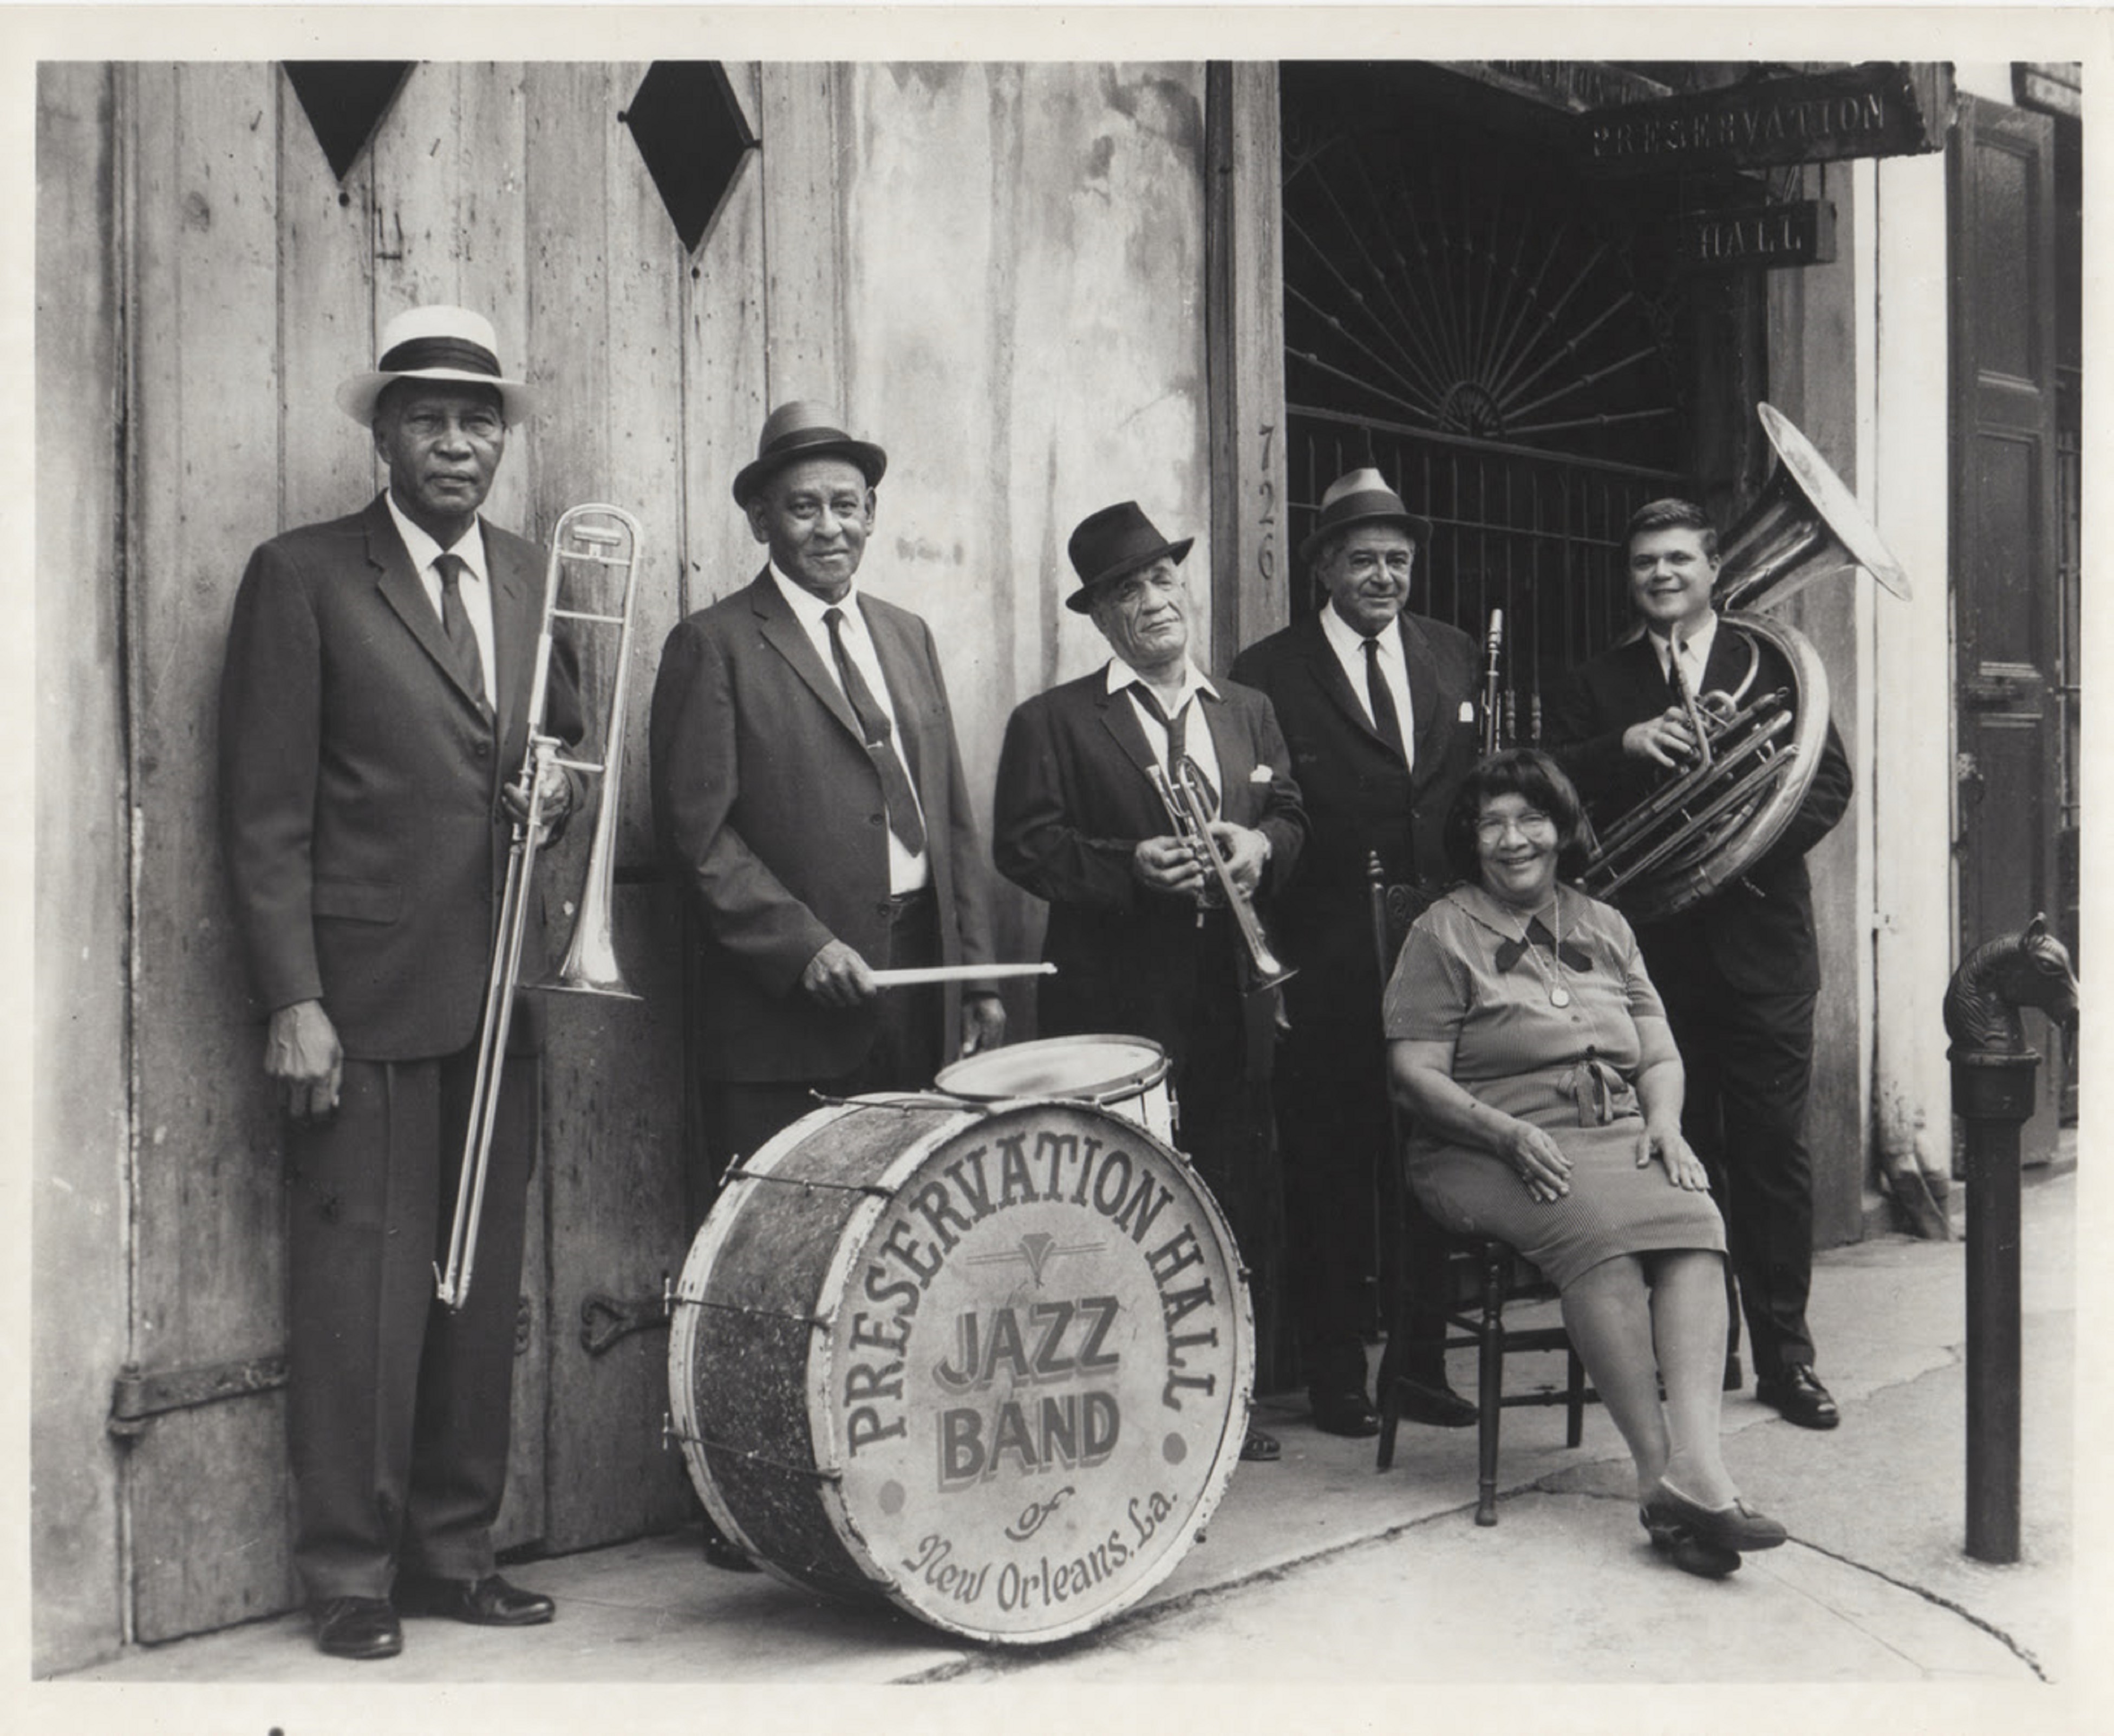 Save the Date: Preservation Hall's 60th Anniversary Concert